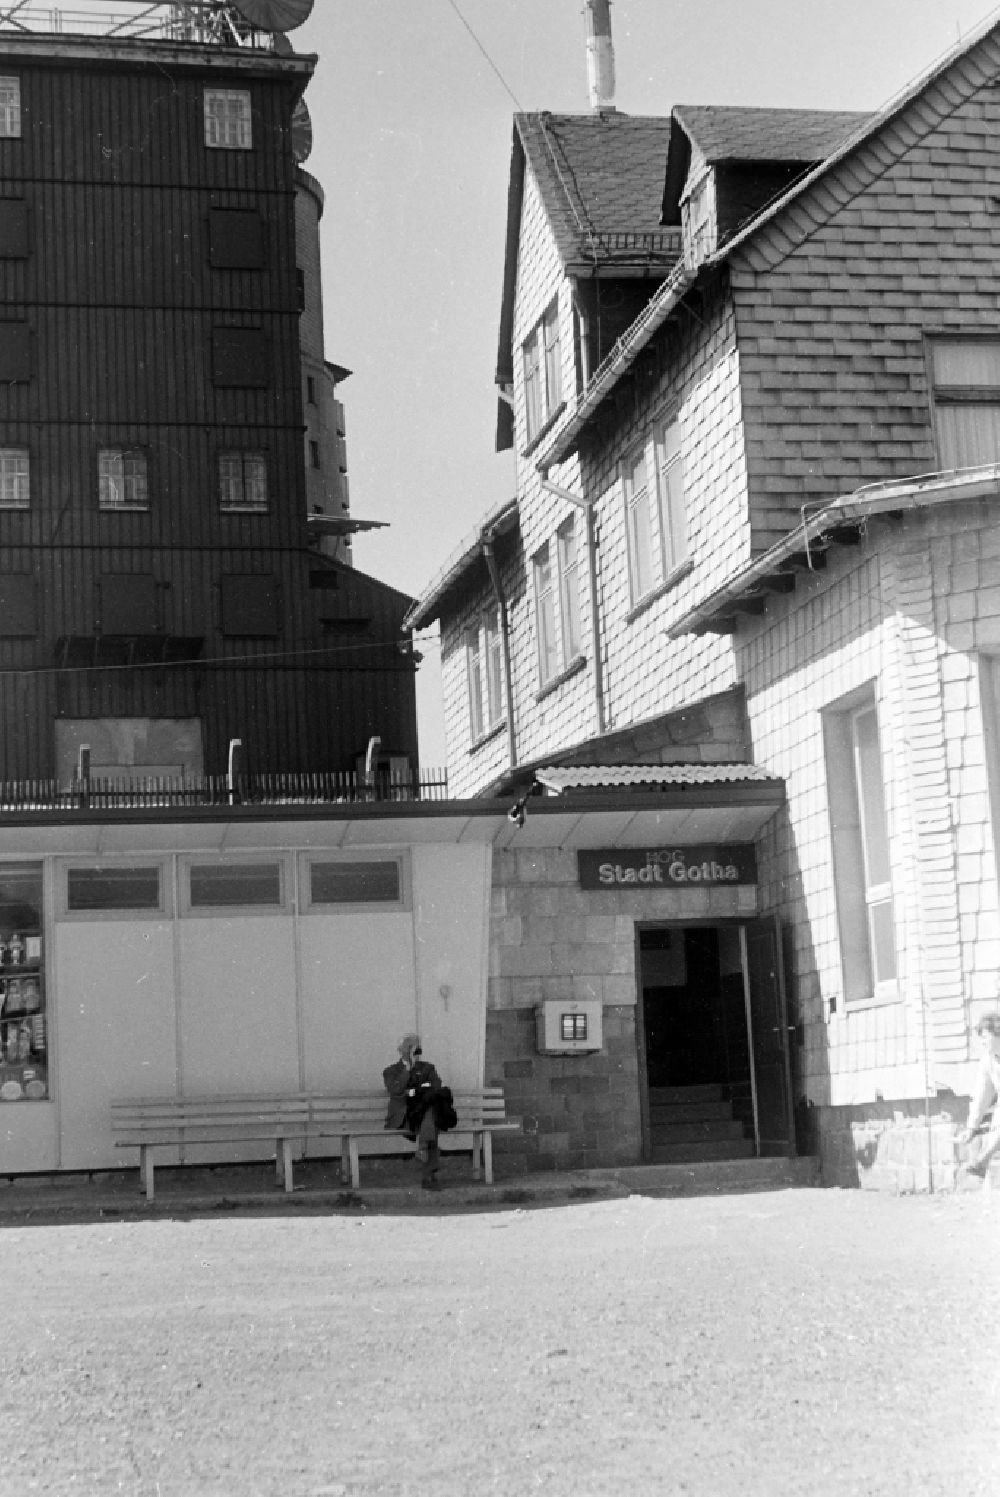 GDR image archive: Brotterode - Restaurant on the Grosser Inselsberg in Brotterode, Thuringia in the territory of the former GDR, German Democratic Republic